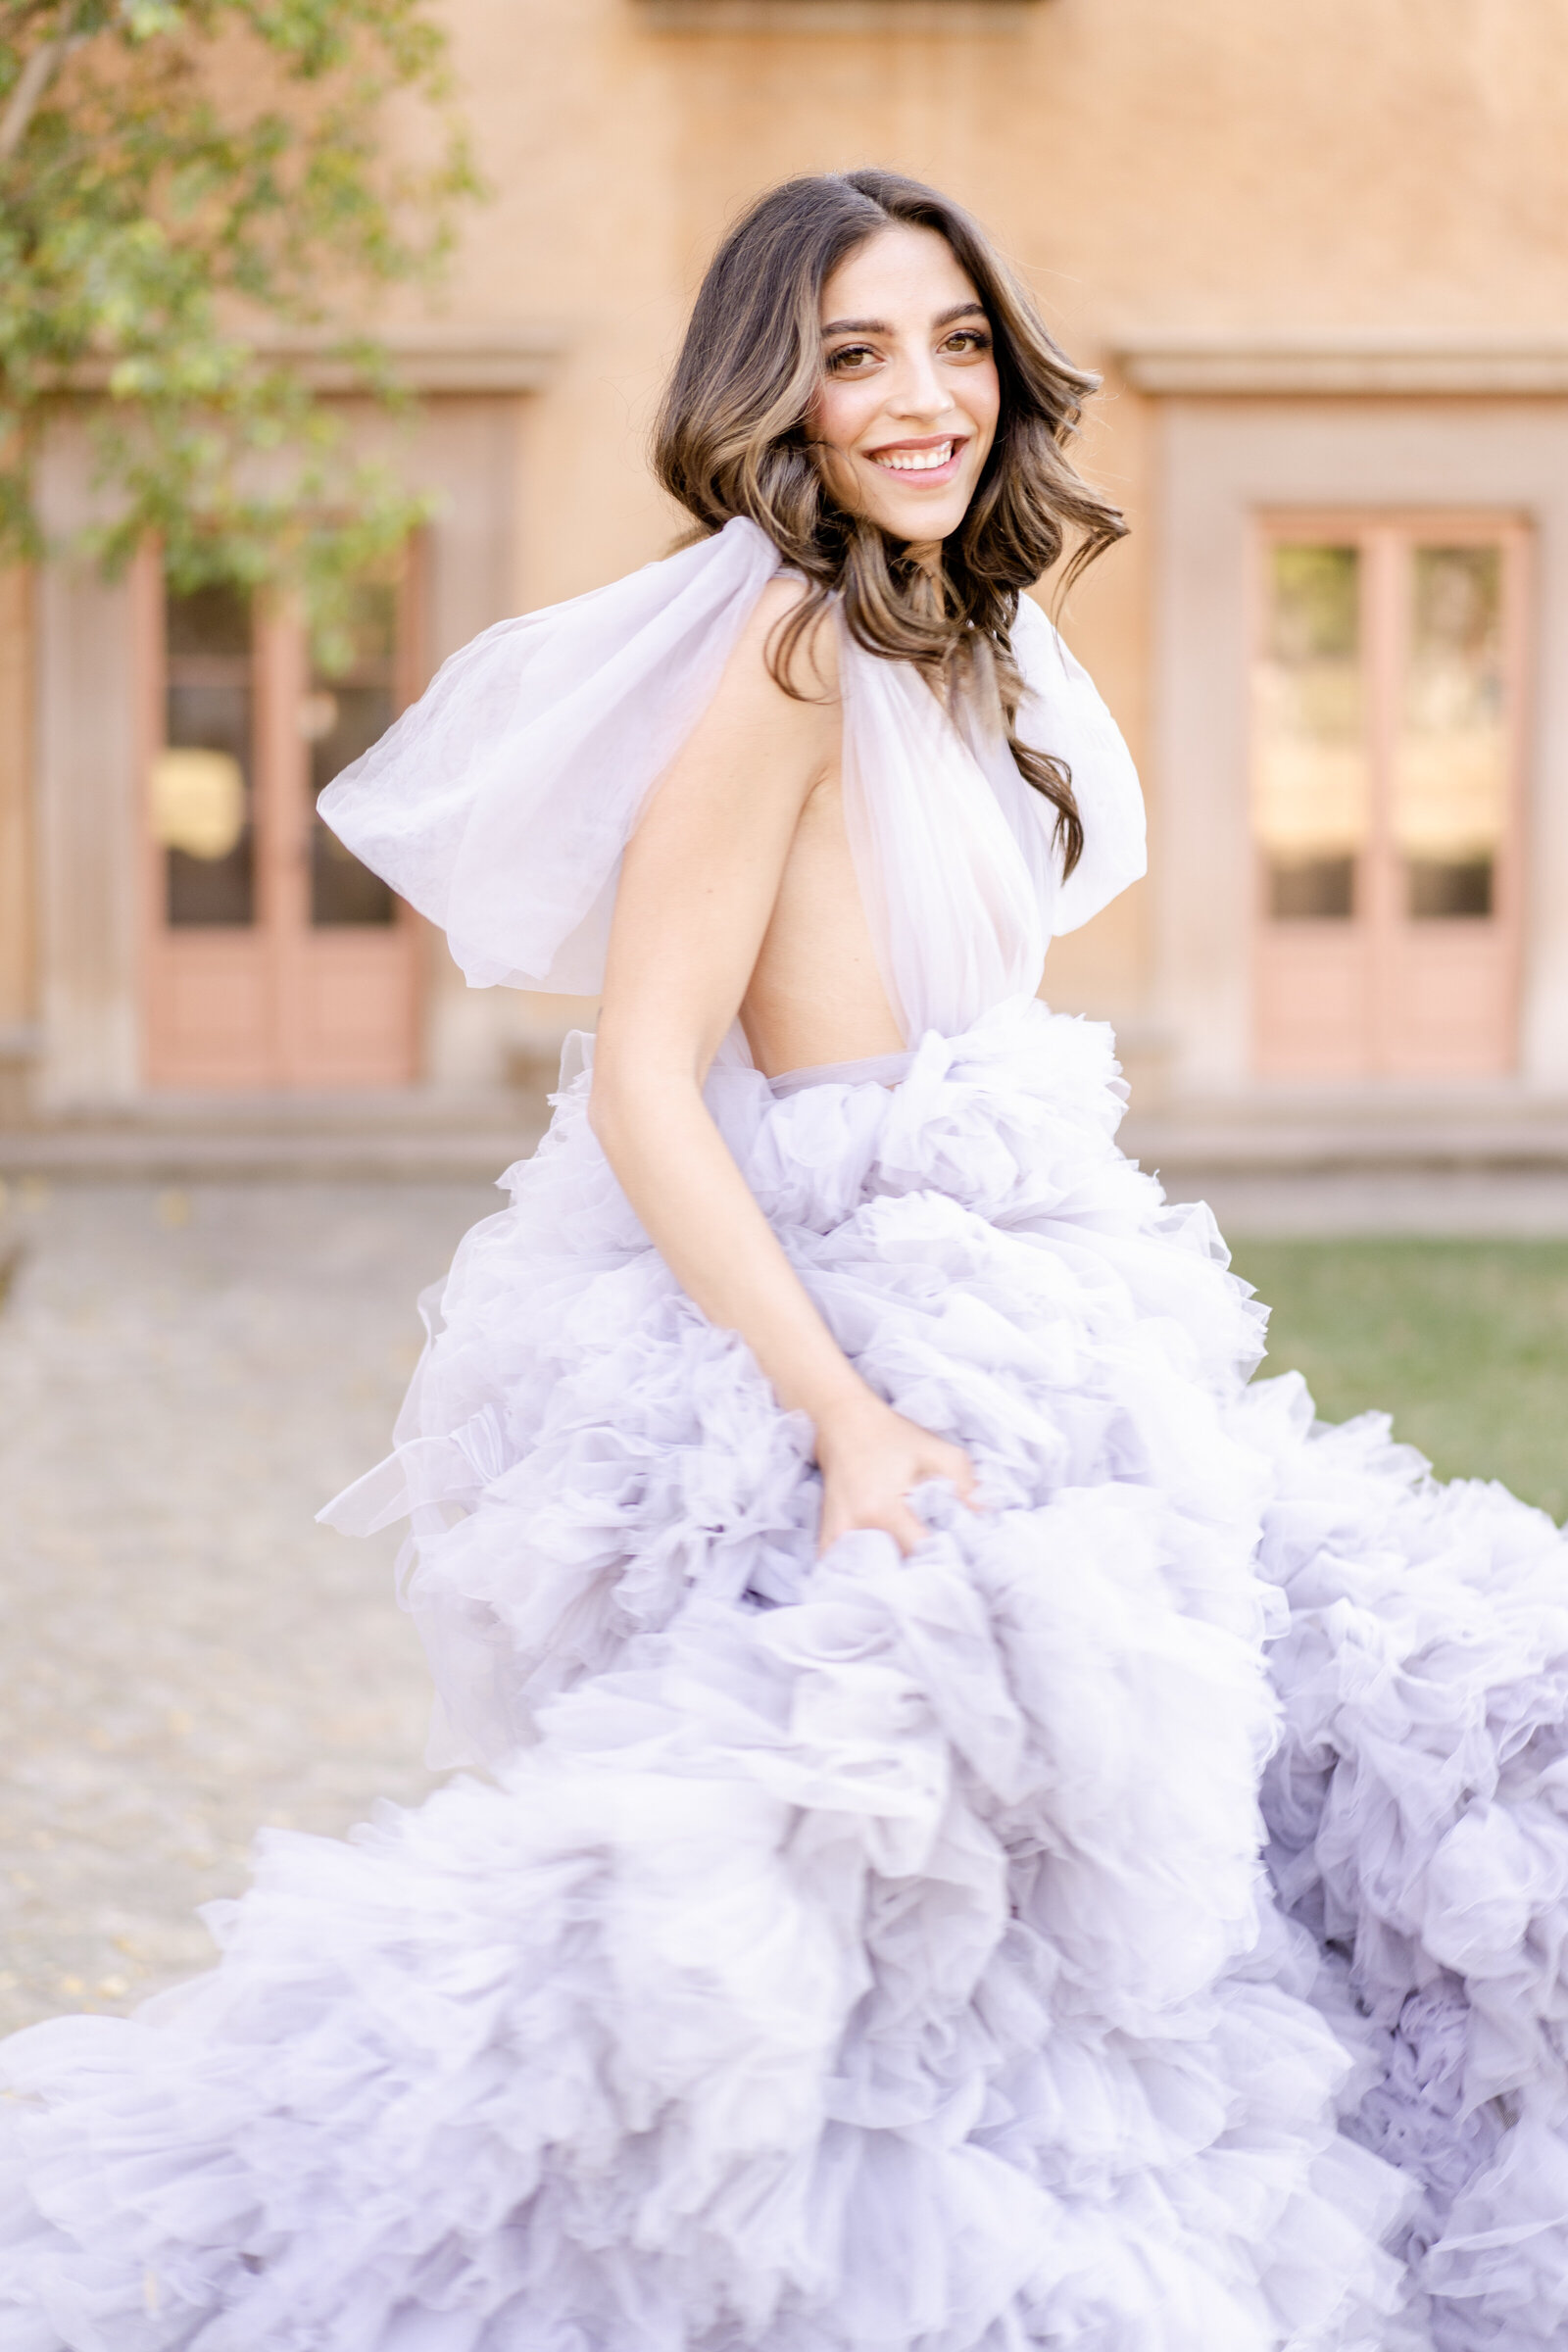 Portrait of a bride in a lavender wedding gown standing in front of a peach-colored building.